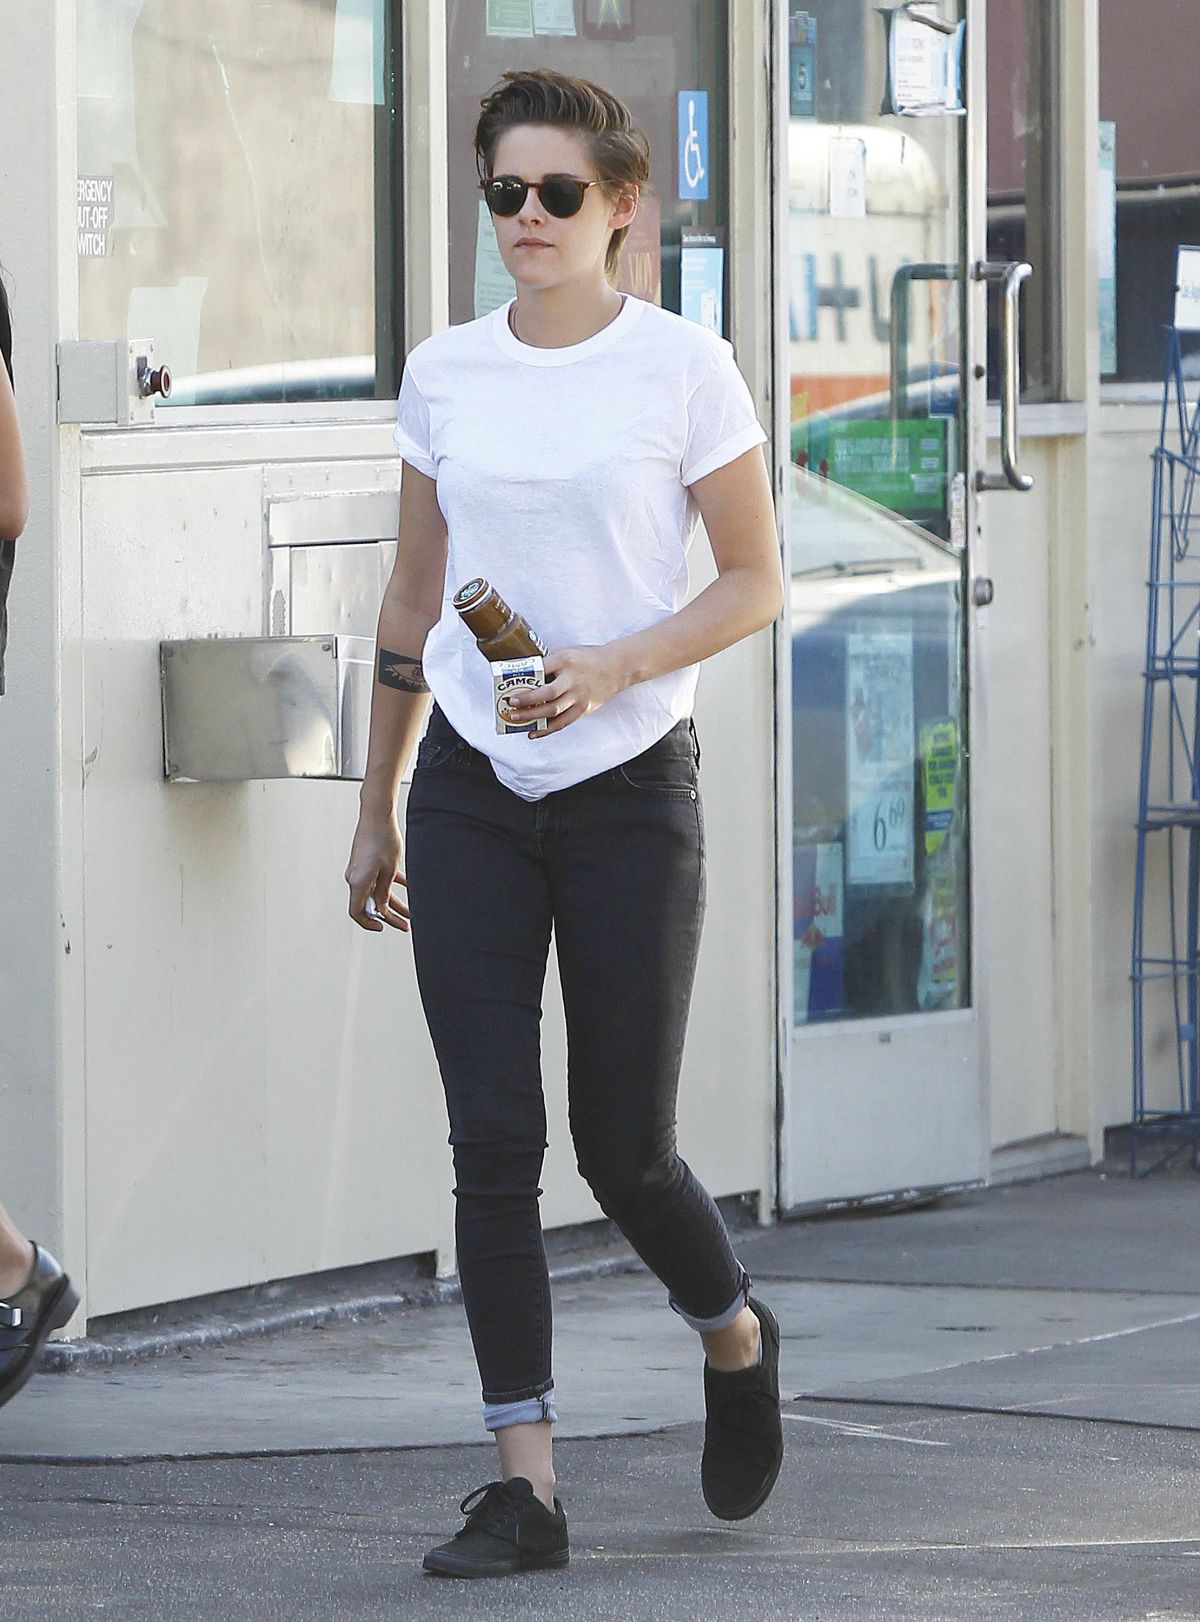 KRISTEN STEWART in Tight Jeans Out and About in Los Angeles HawtCelebs